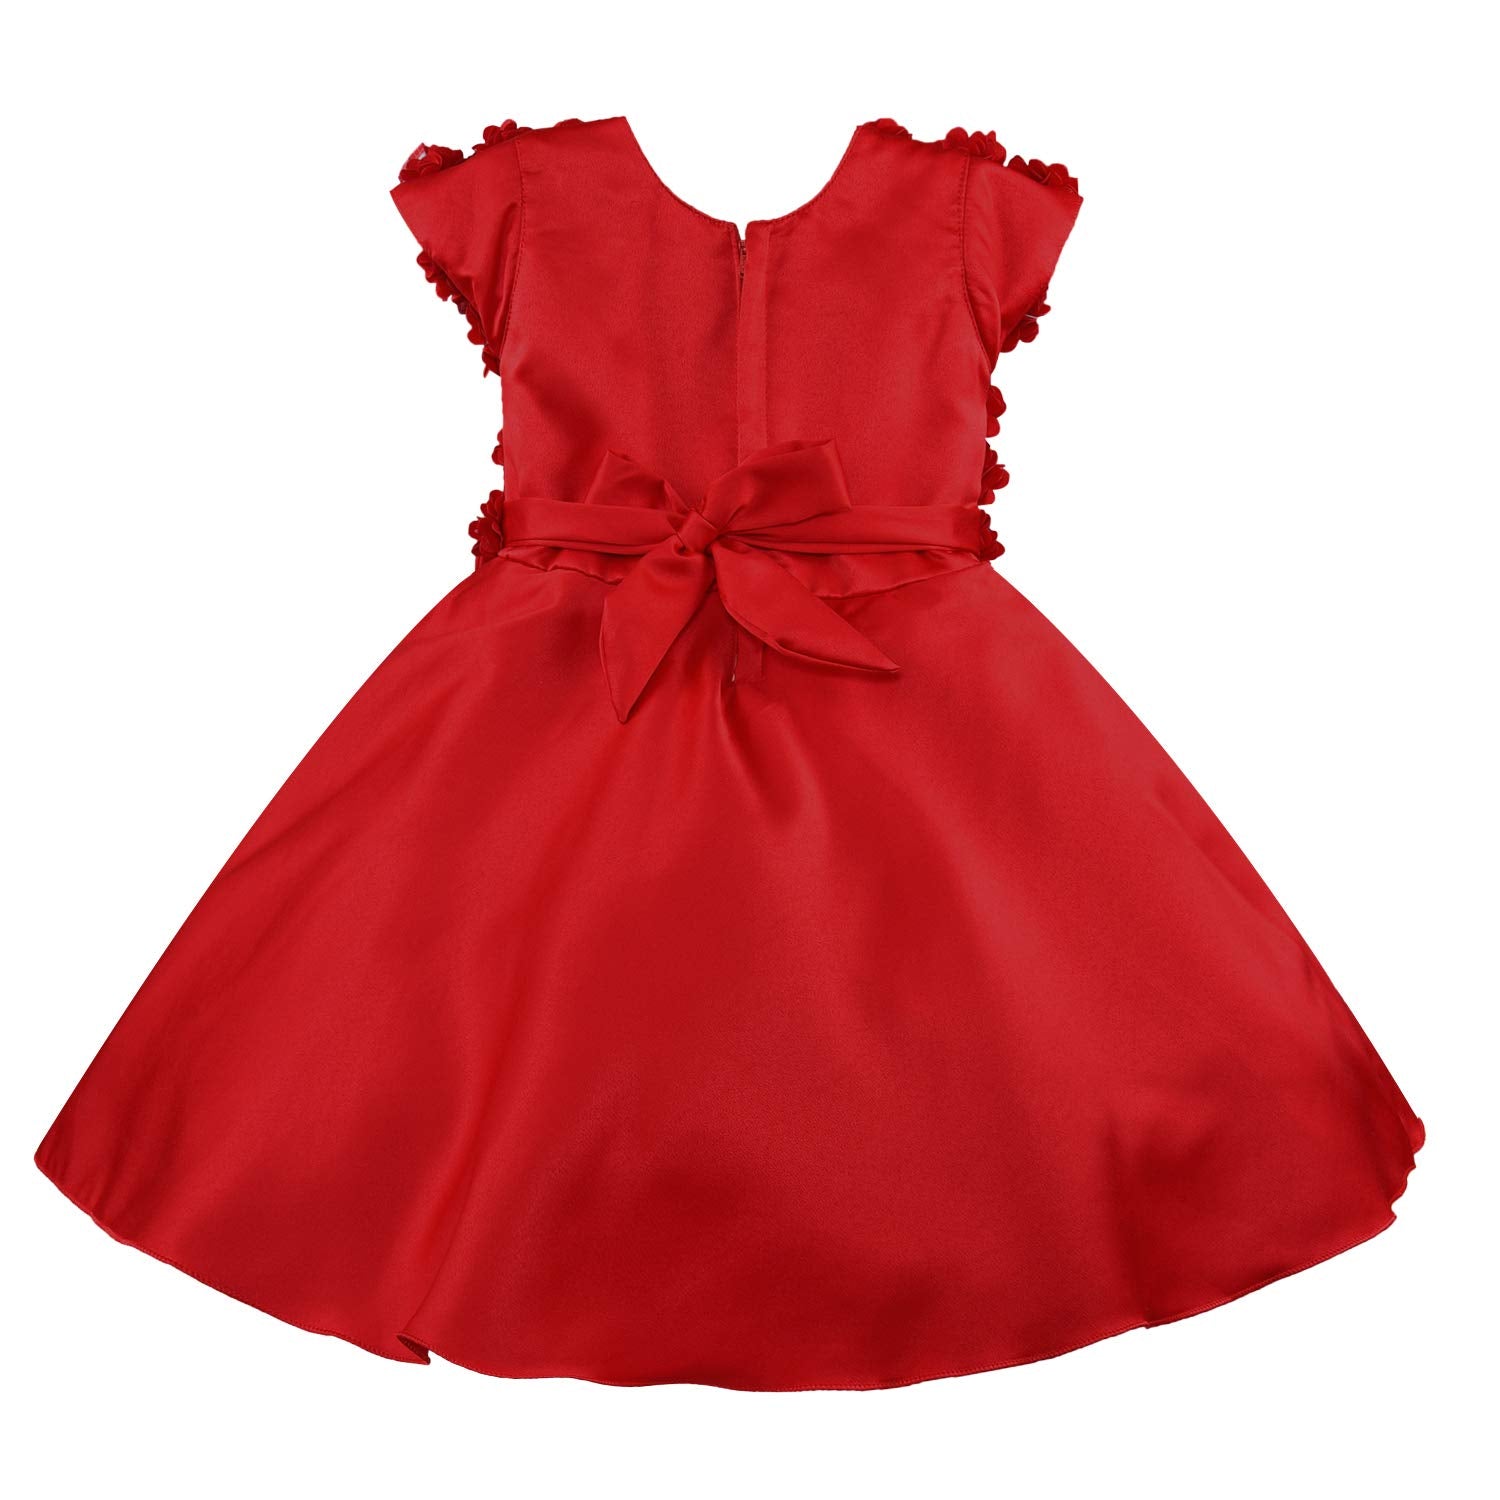 Baby Girls Party Wear Frock Birthday Dress For Girls bxa239rd - Wish Karo Party Wear - frocks Party Wear - baby dress